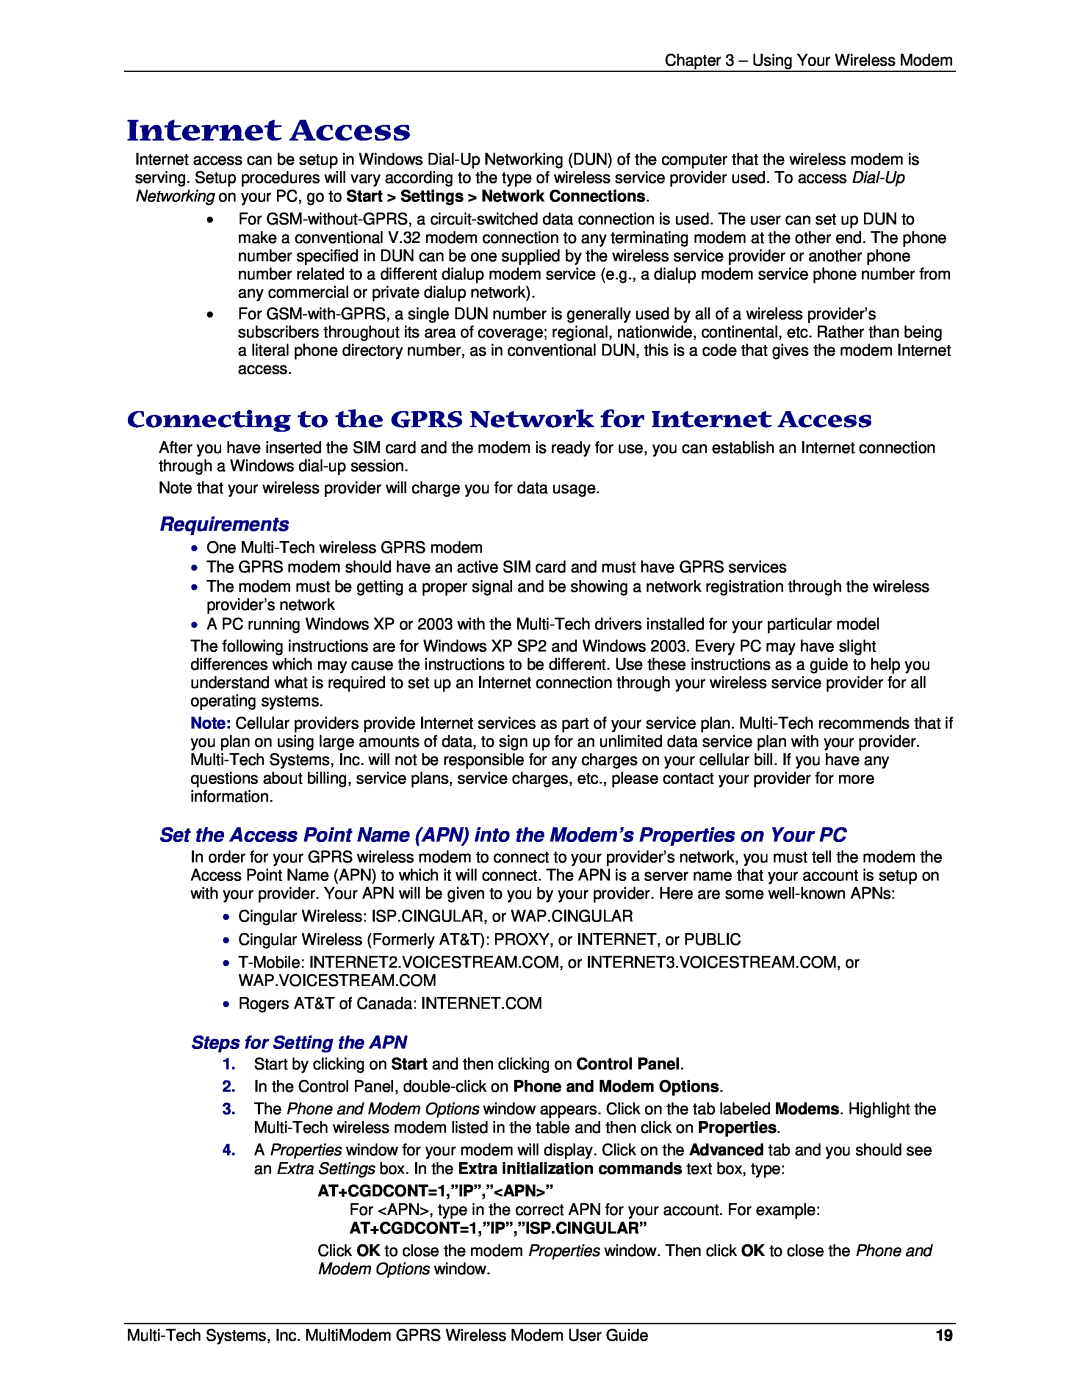 Multi-Tech Systems F2 manual Connecting to the GPRS Network for Internet Access, Modem Options window, Requirements 